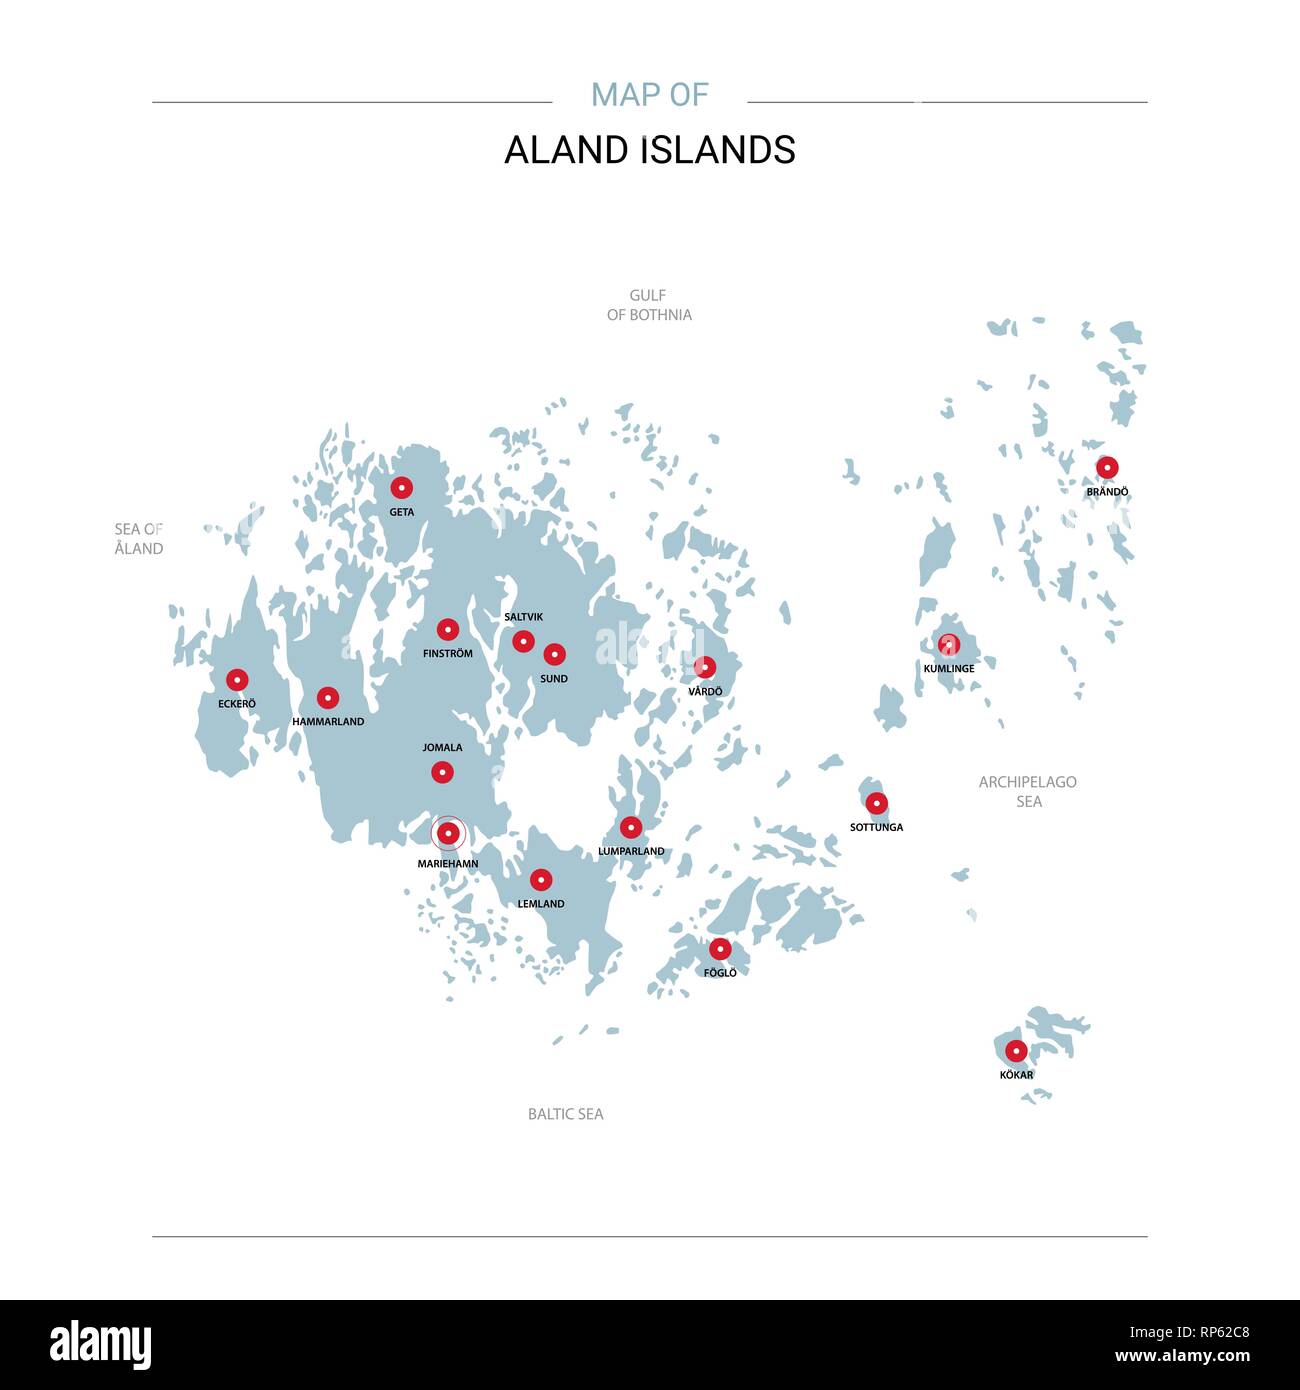 Aland Islands vector map. Editable template with regions, cities, red pins and blue surface on white background. Stock Vector